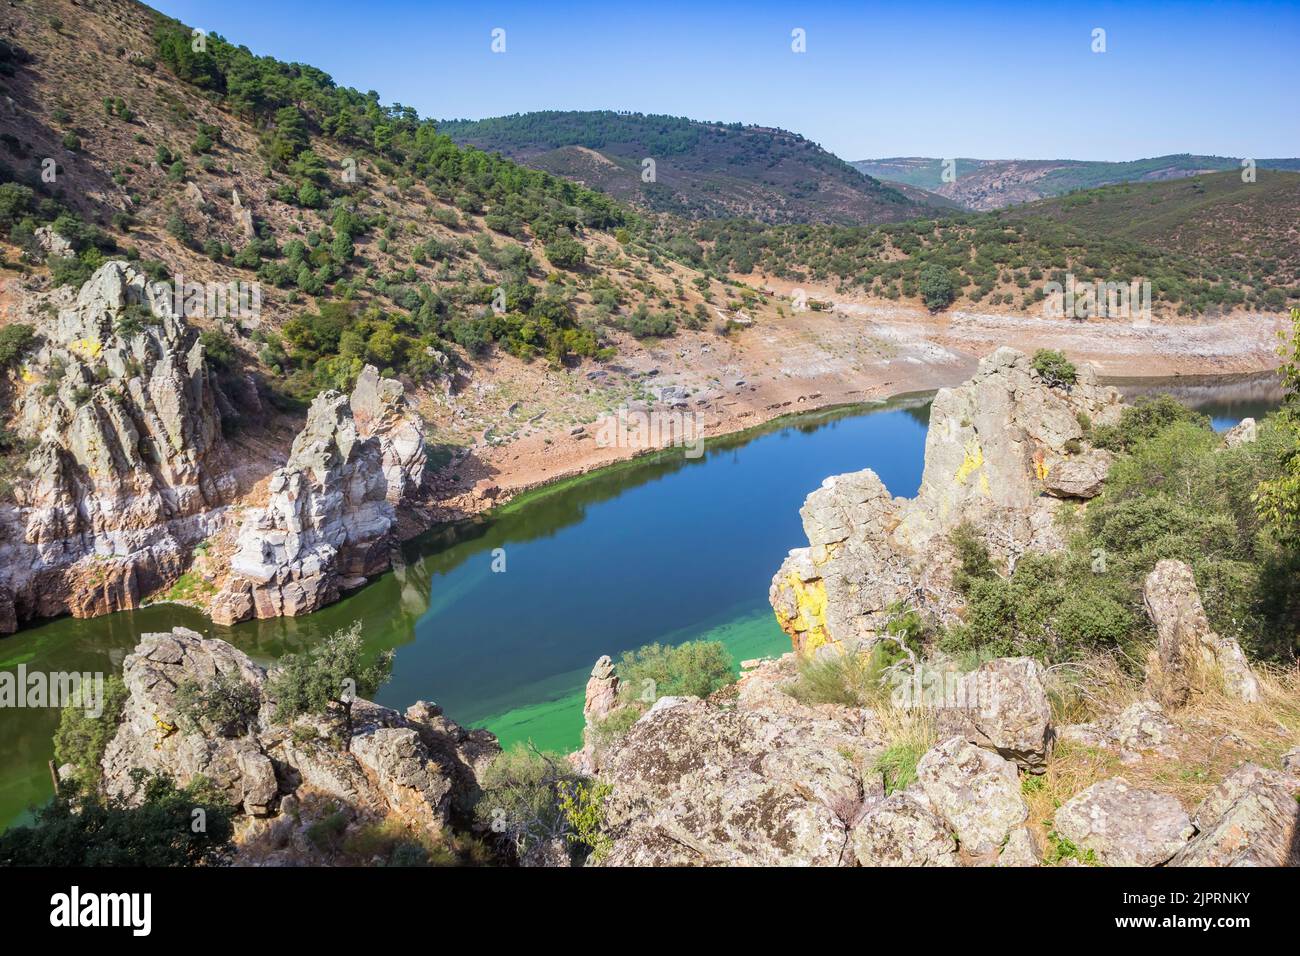 Rocks and lake of the Monfrague national park, Spain Stock Photo